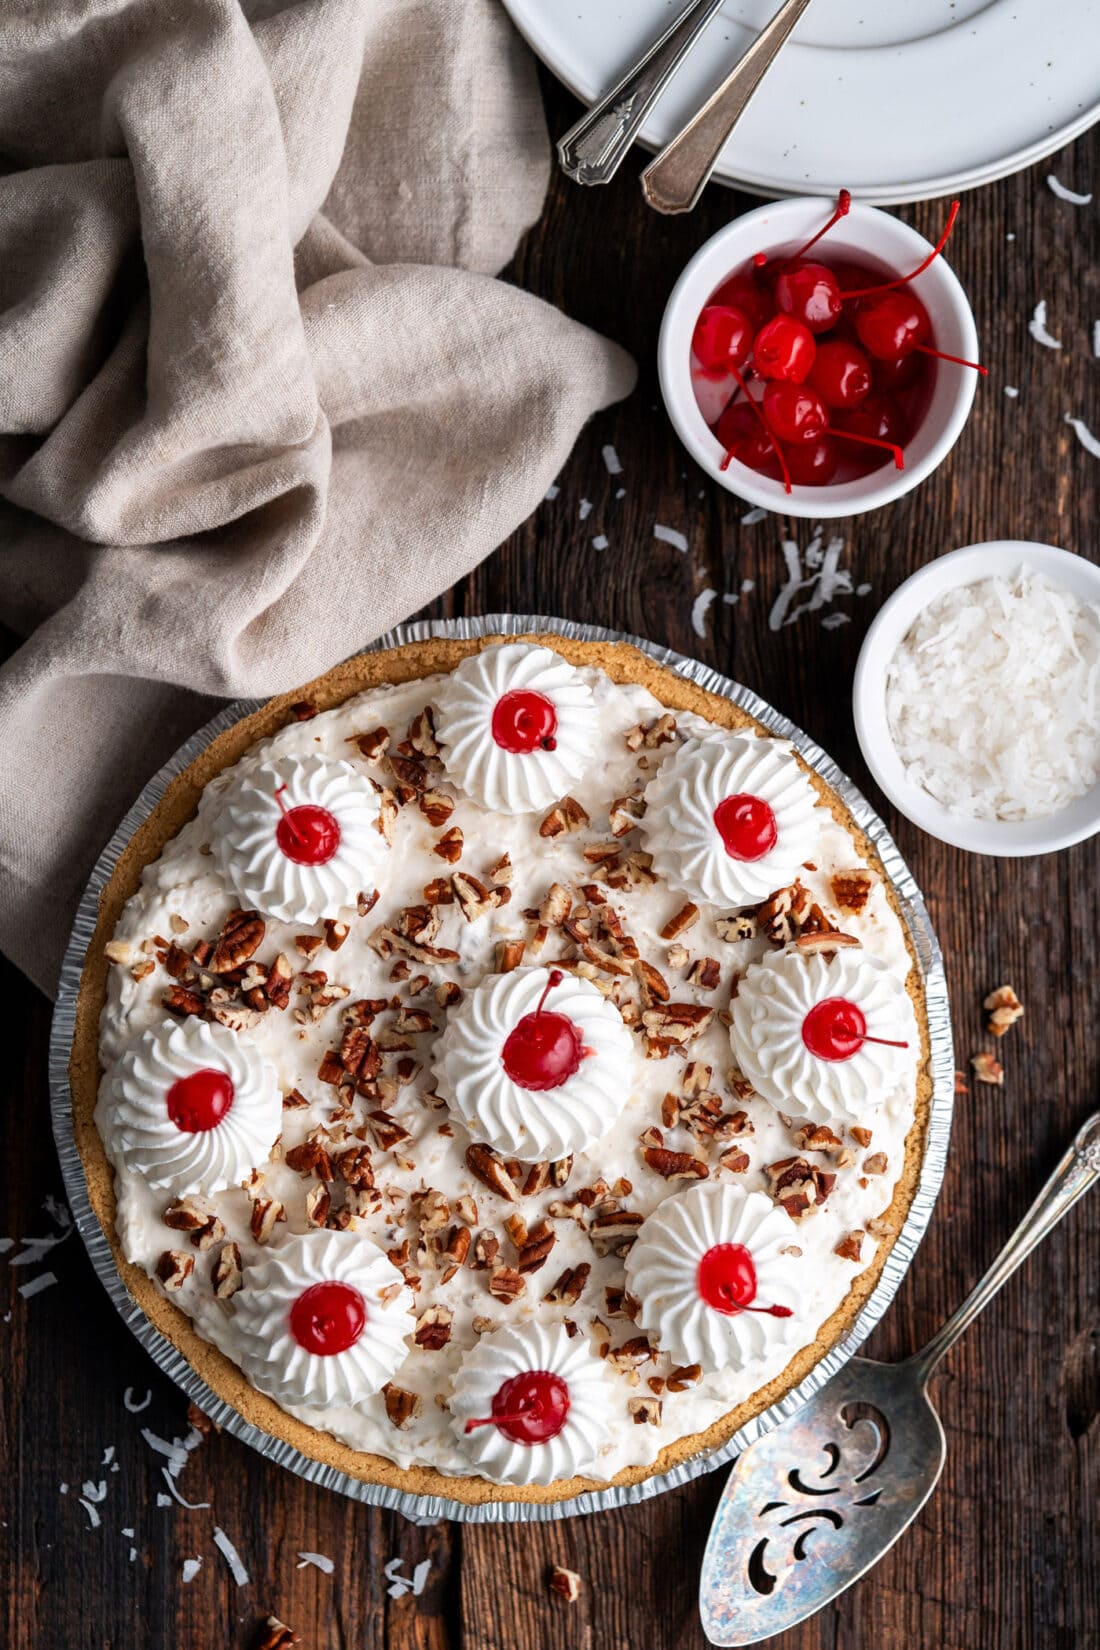 Million Dollar Pie with a bowl of cherries and shredded coconut on the side